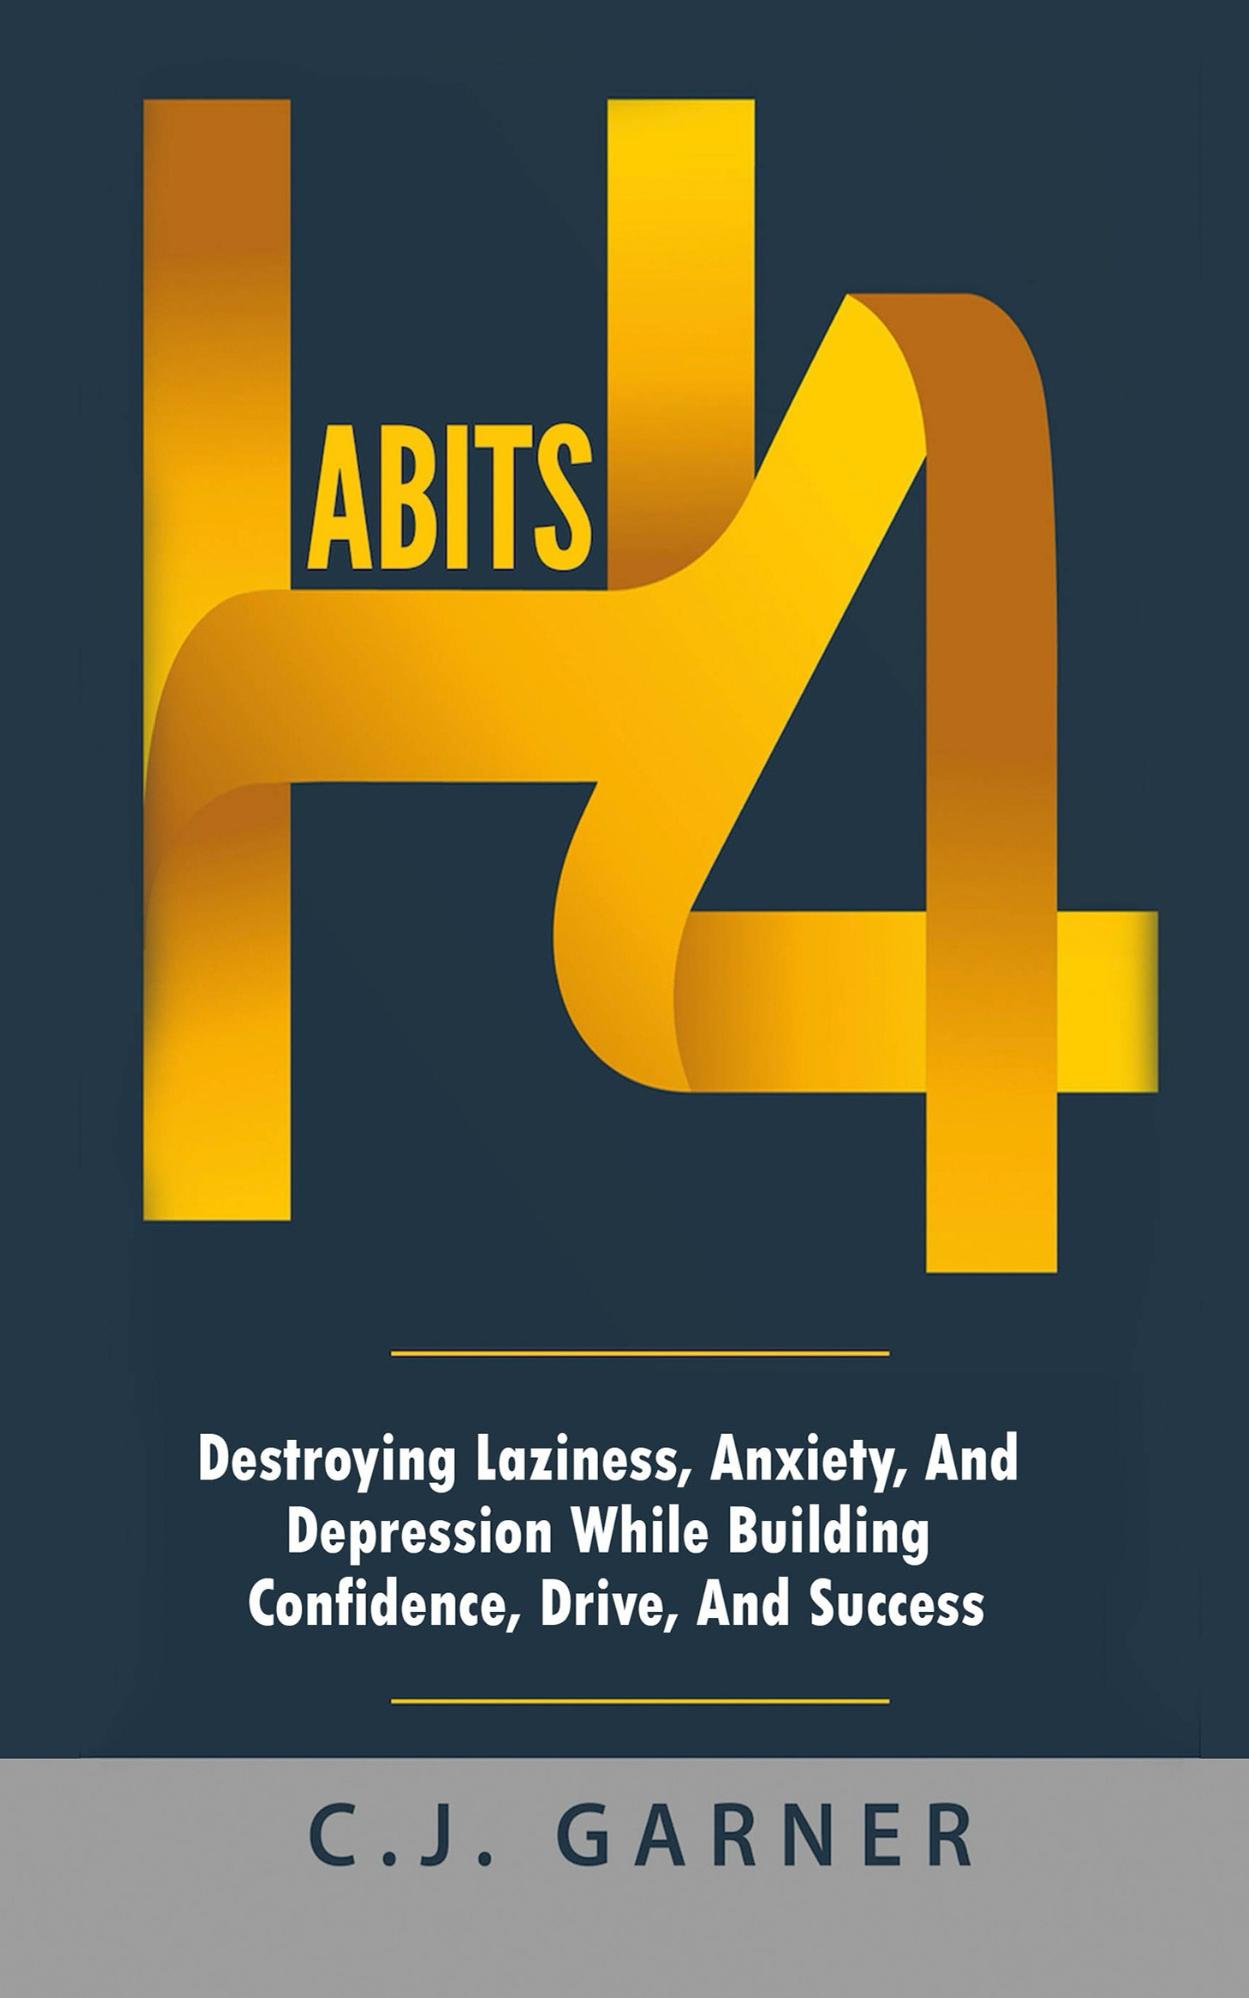 FREE: Habits: 4 Destroying Laziness, Anxiety, And Depression While Building Confidence, Drive, And Success by C.J. Garner